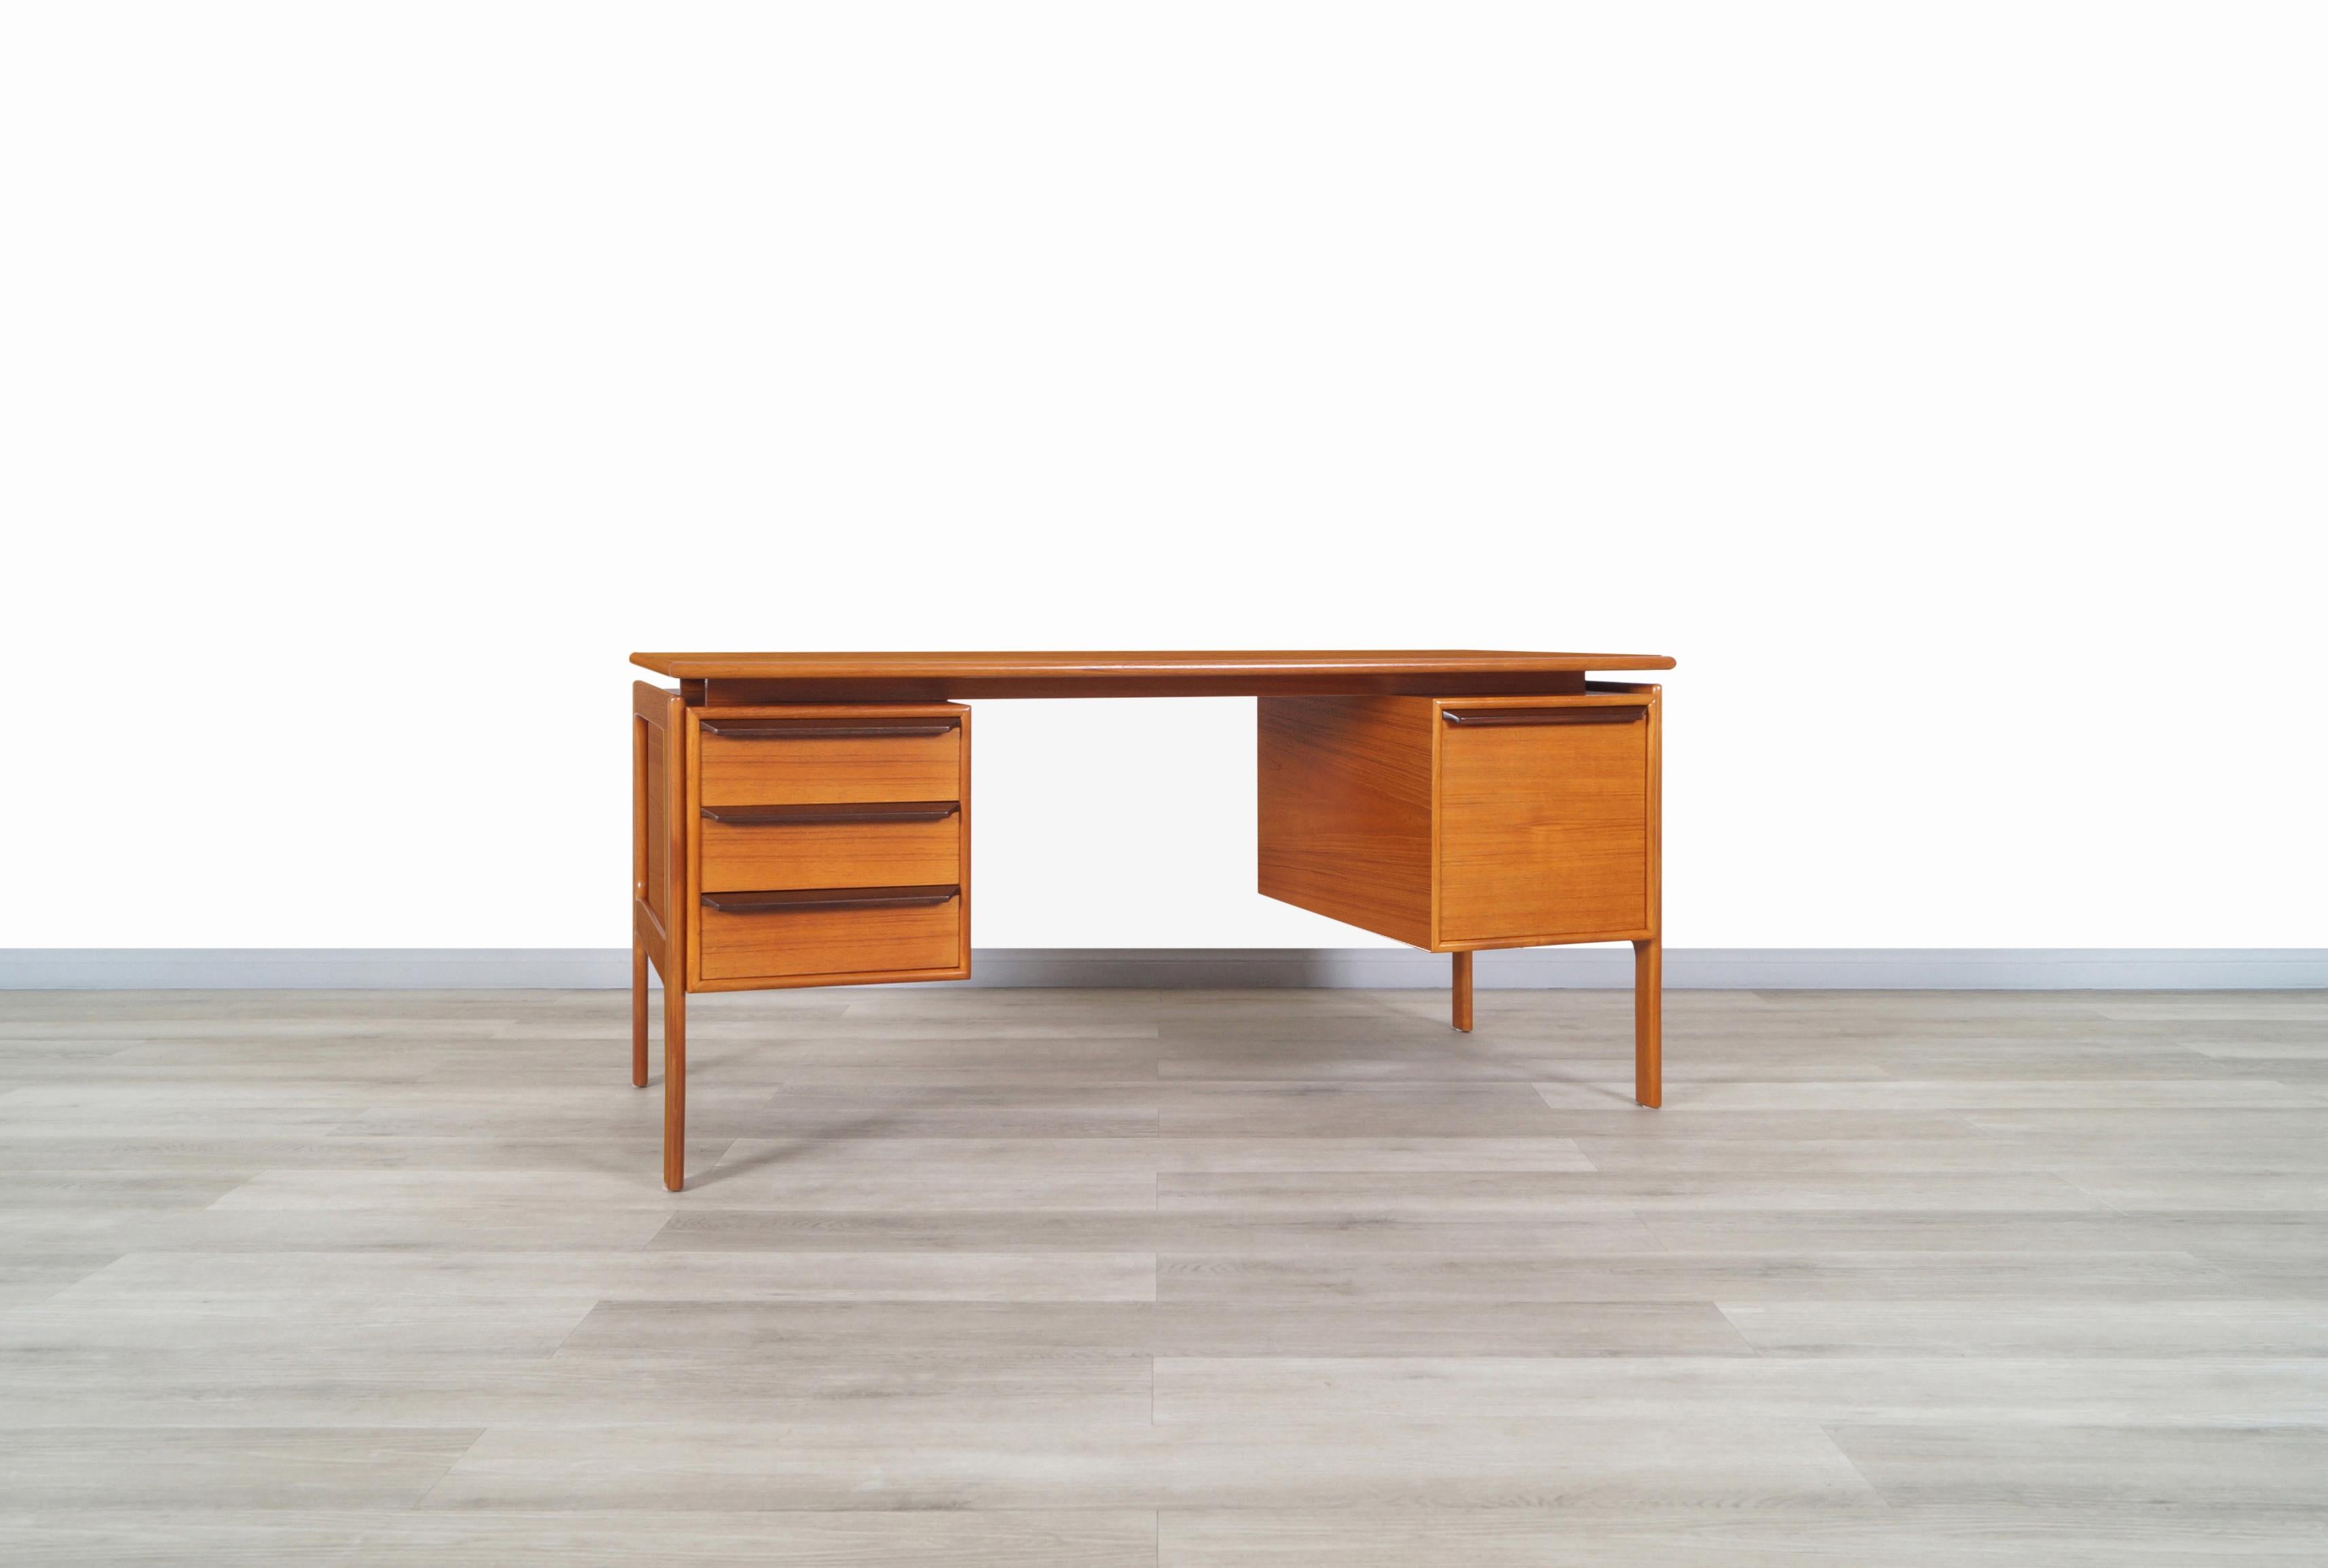 Stunning Danish modern floating top teak desk manufactured by G.V. Møbler in Denmark, circa 1960s. On the left side features three dovetail drawers, and on the right side, it has a wide file drawer with aluminum rails that facilitate the sliding of